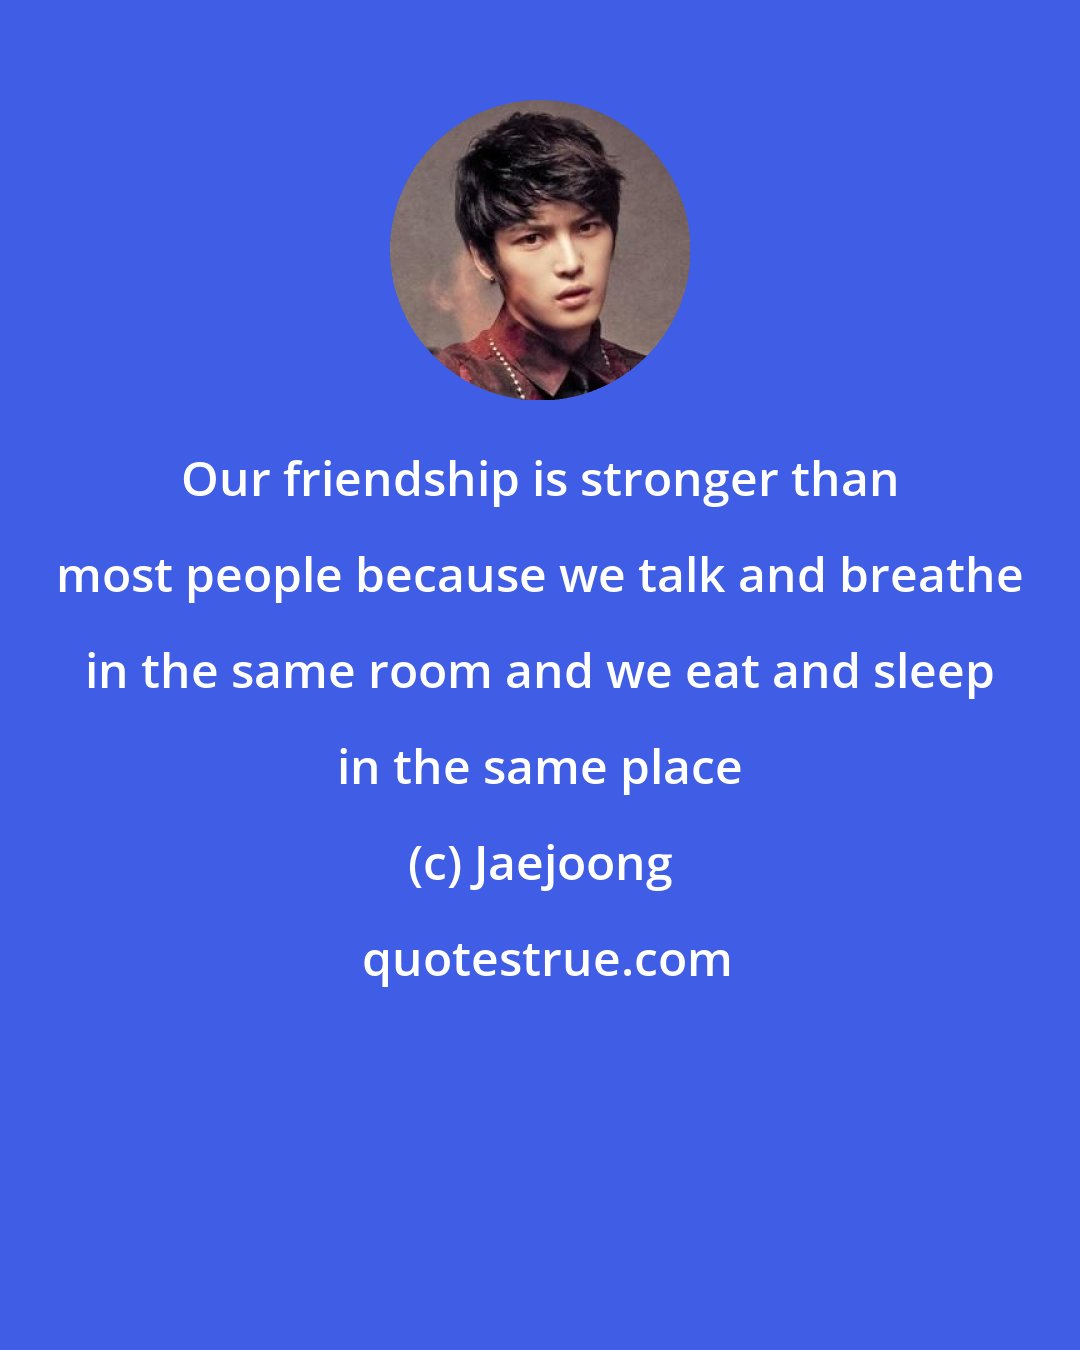 Jaejoong: Our friendship is stronger than most people because we talk and breathe in the same room and we eat and sleep in the same place